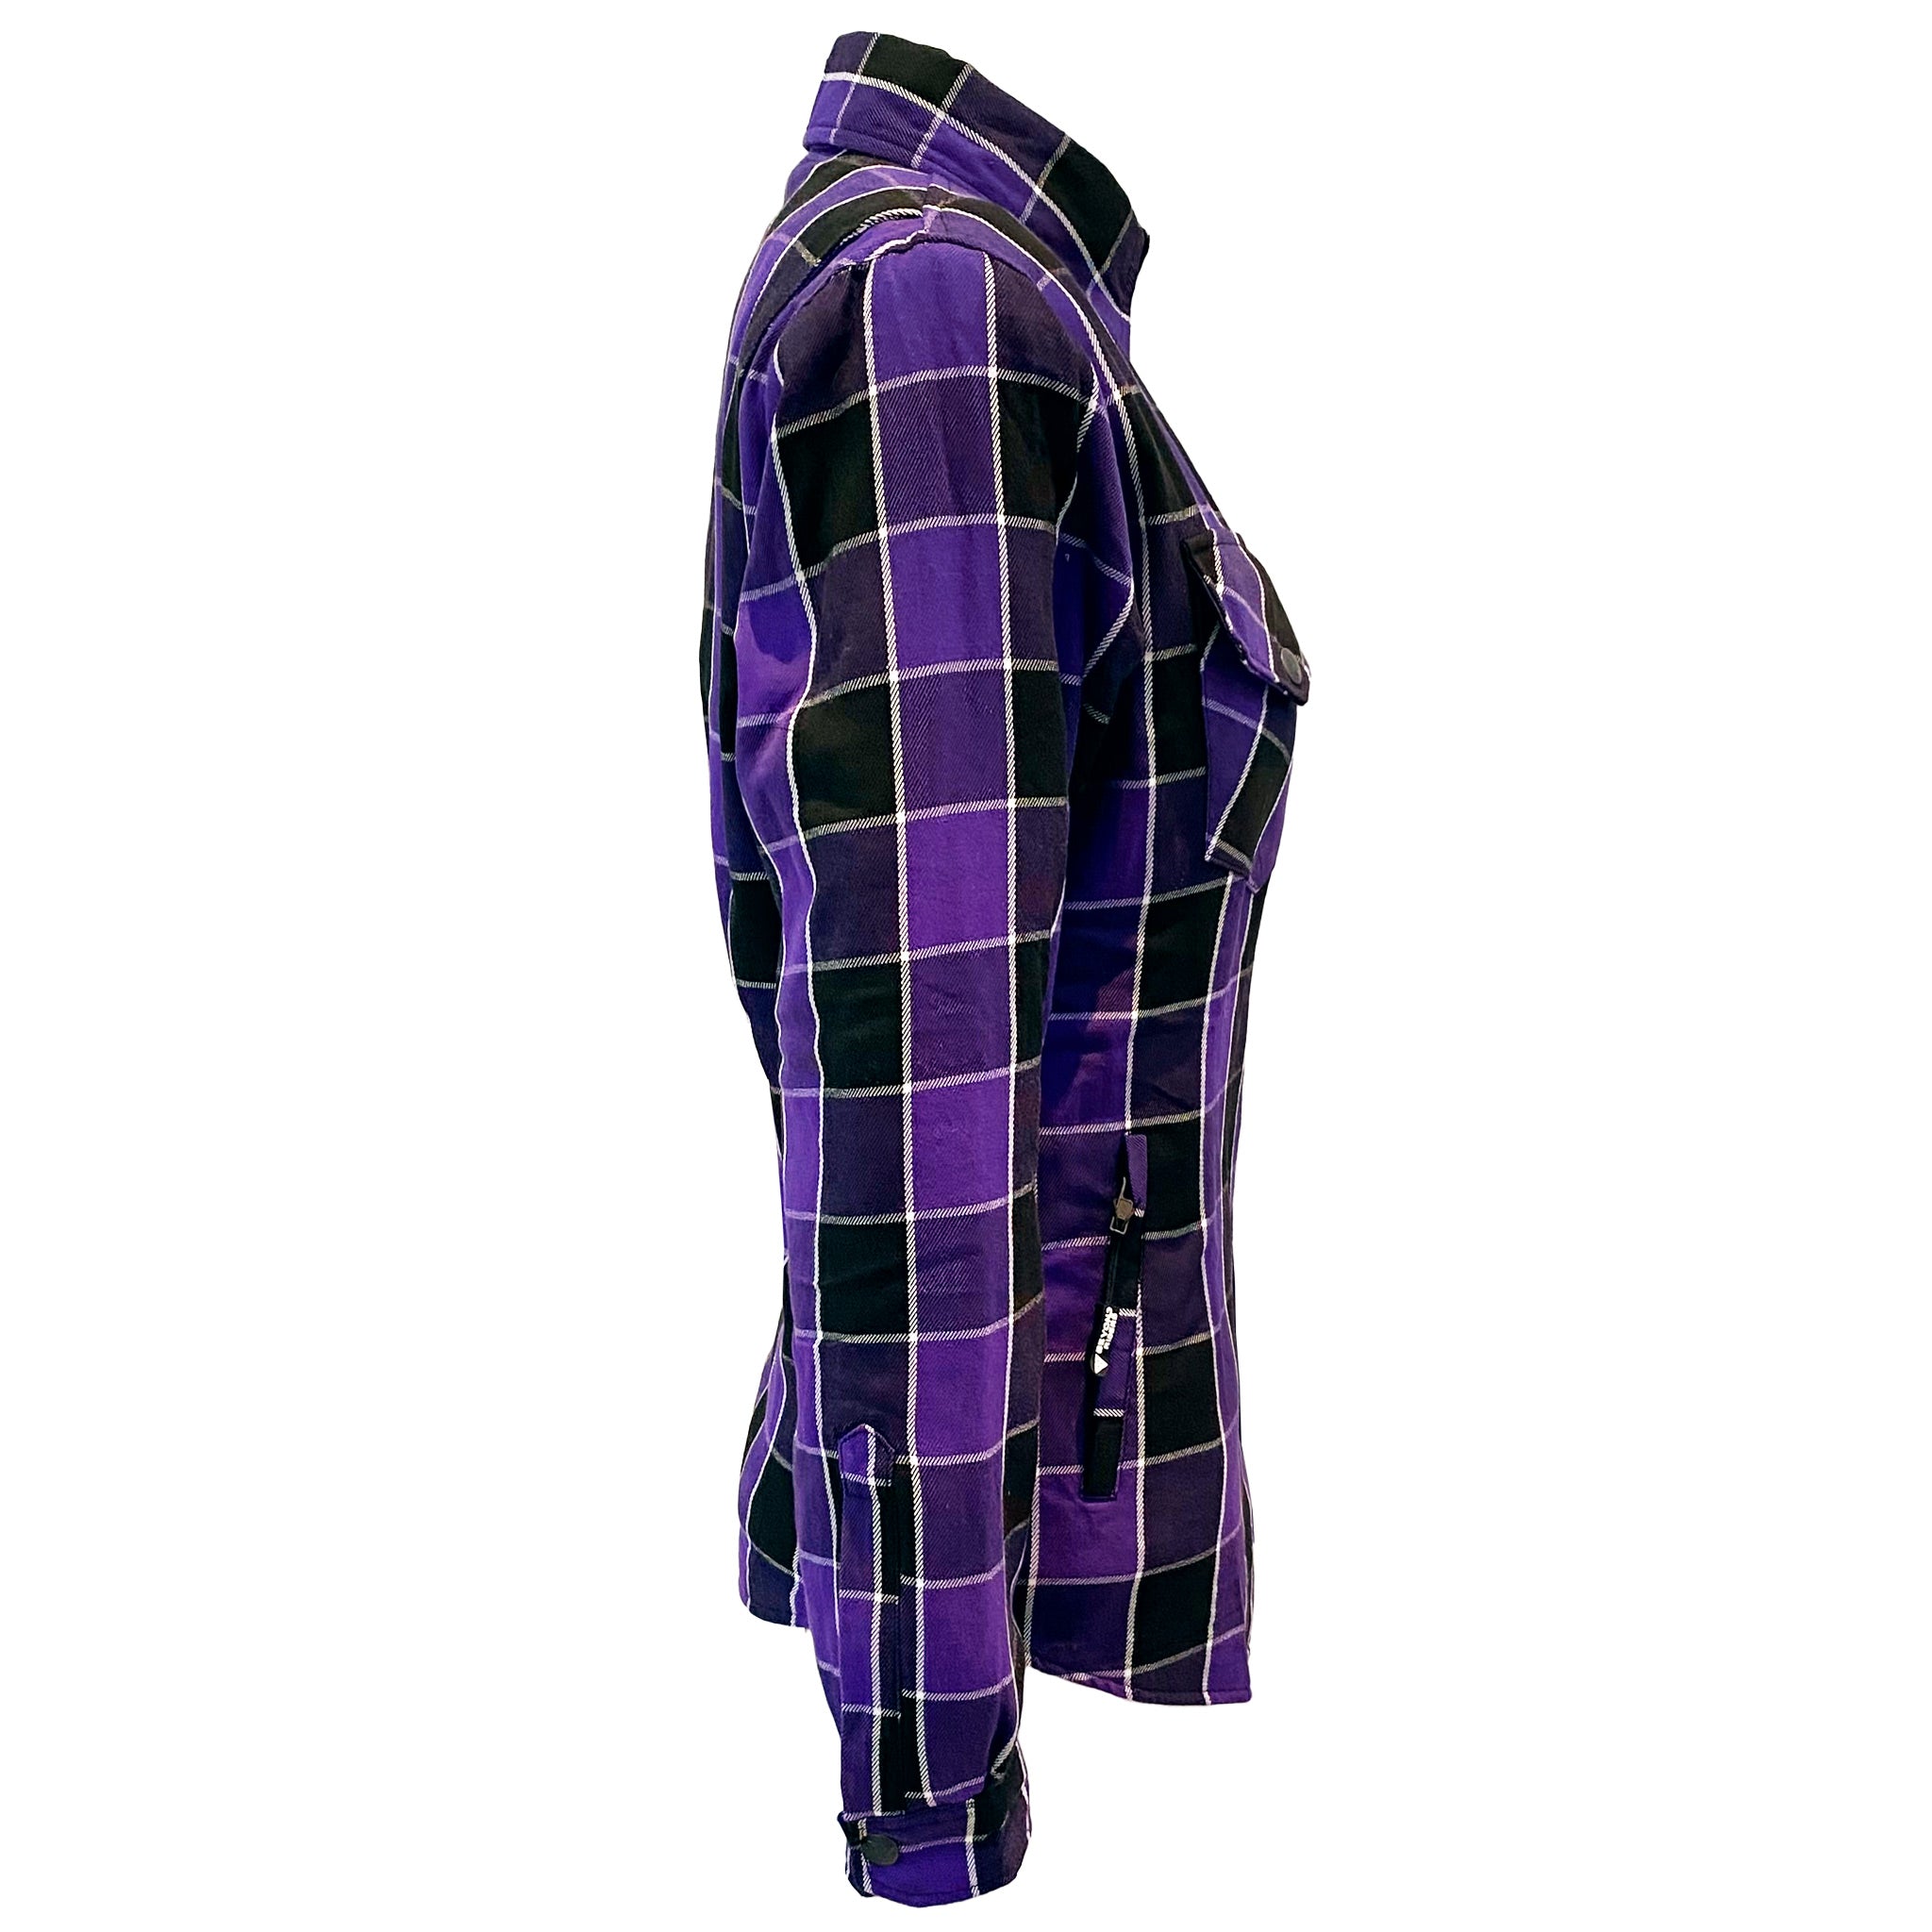 Women's-Flannel-Shirt-Purple-Black-Checkered-And-White-Strips-Right